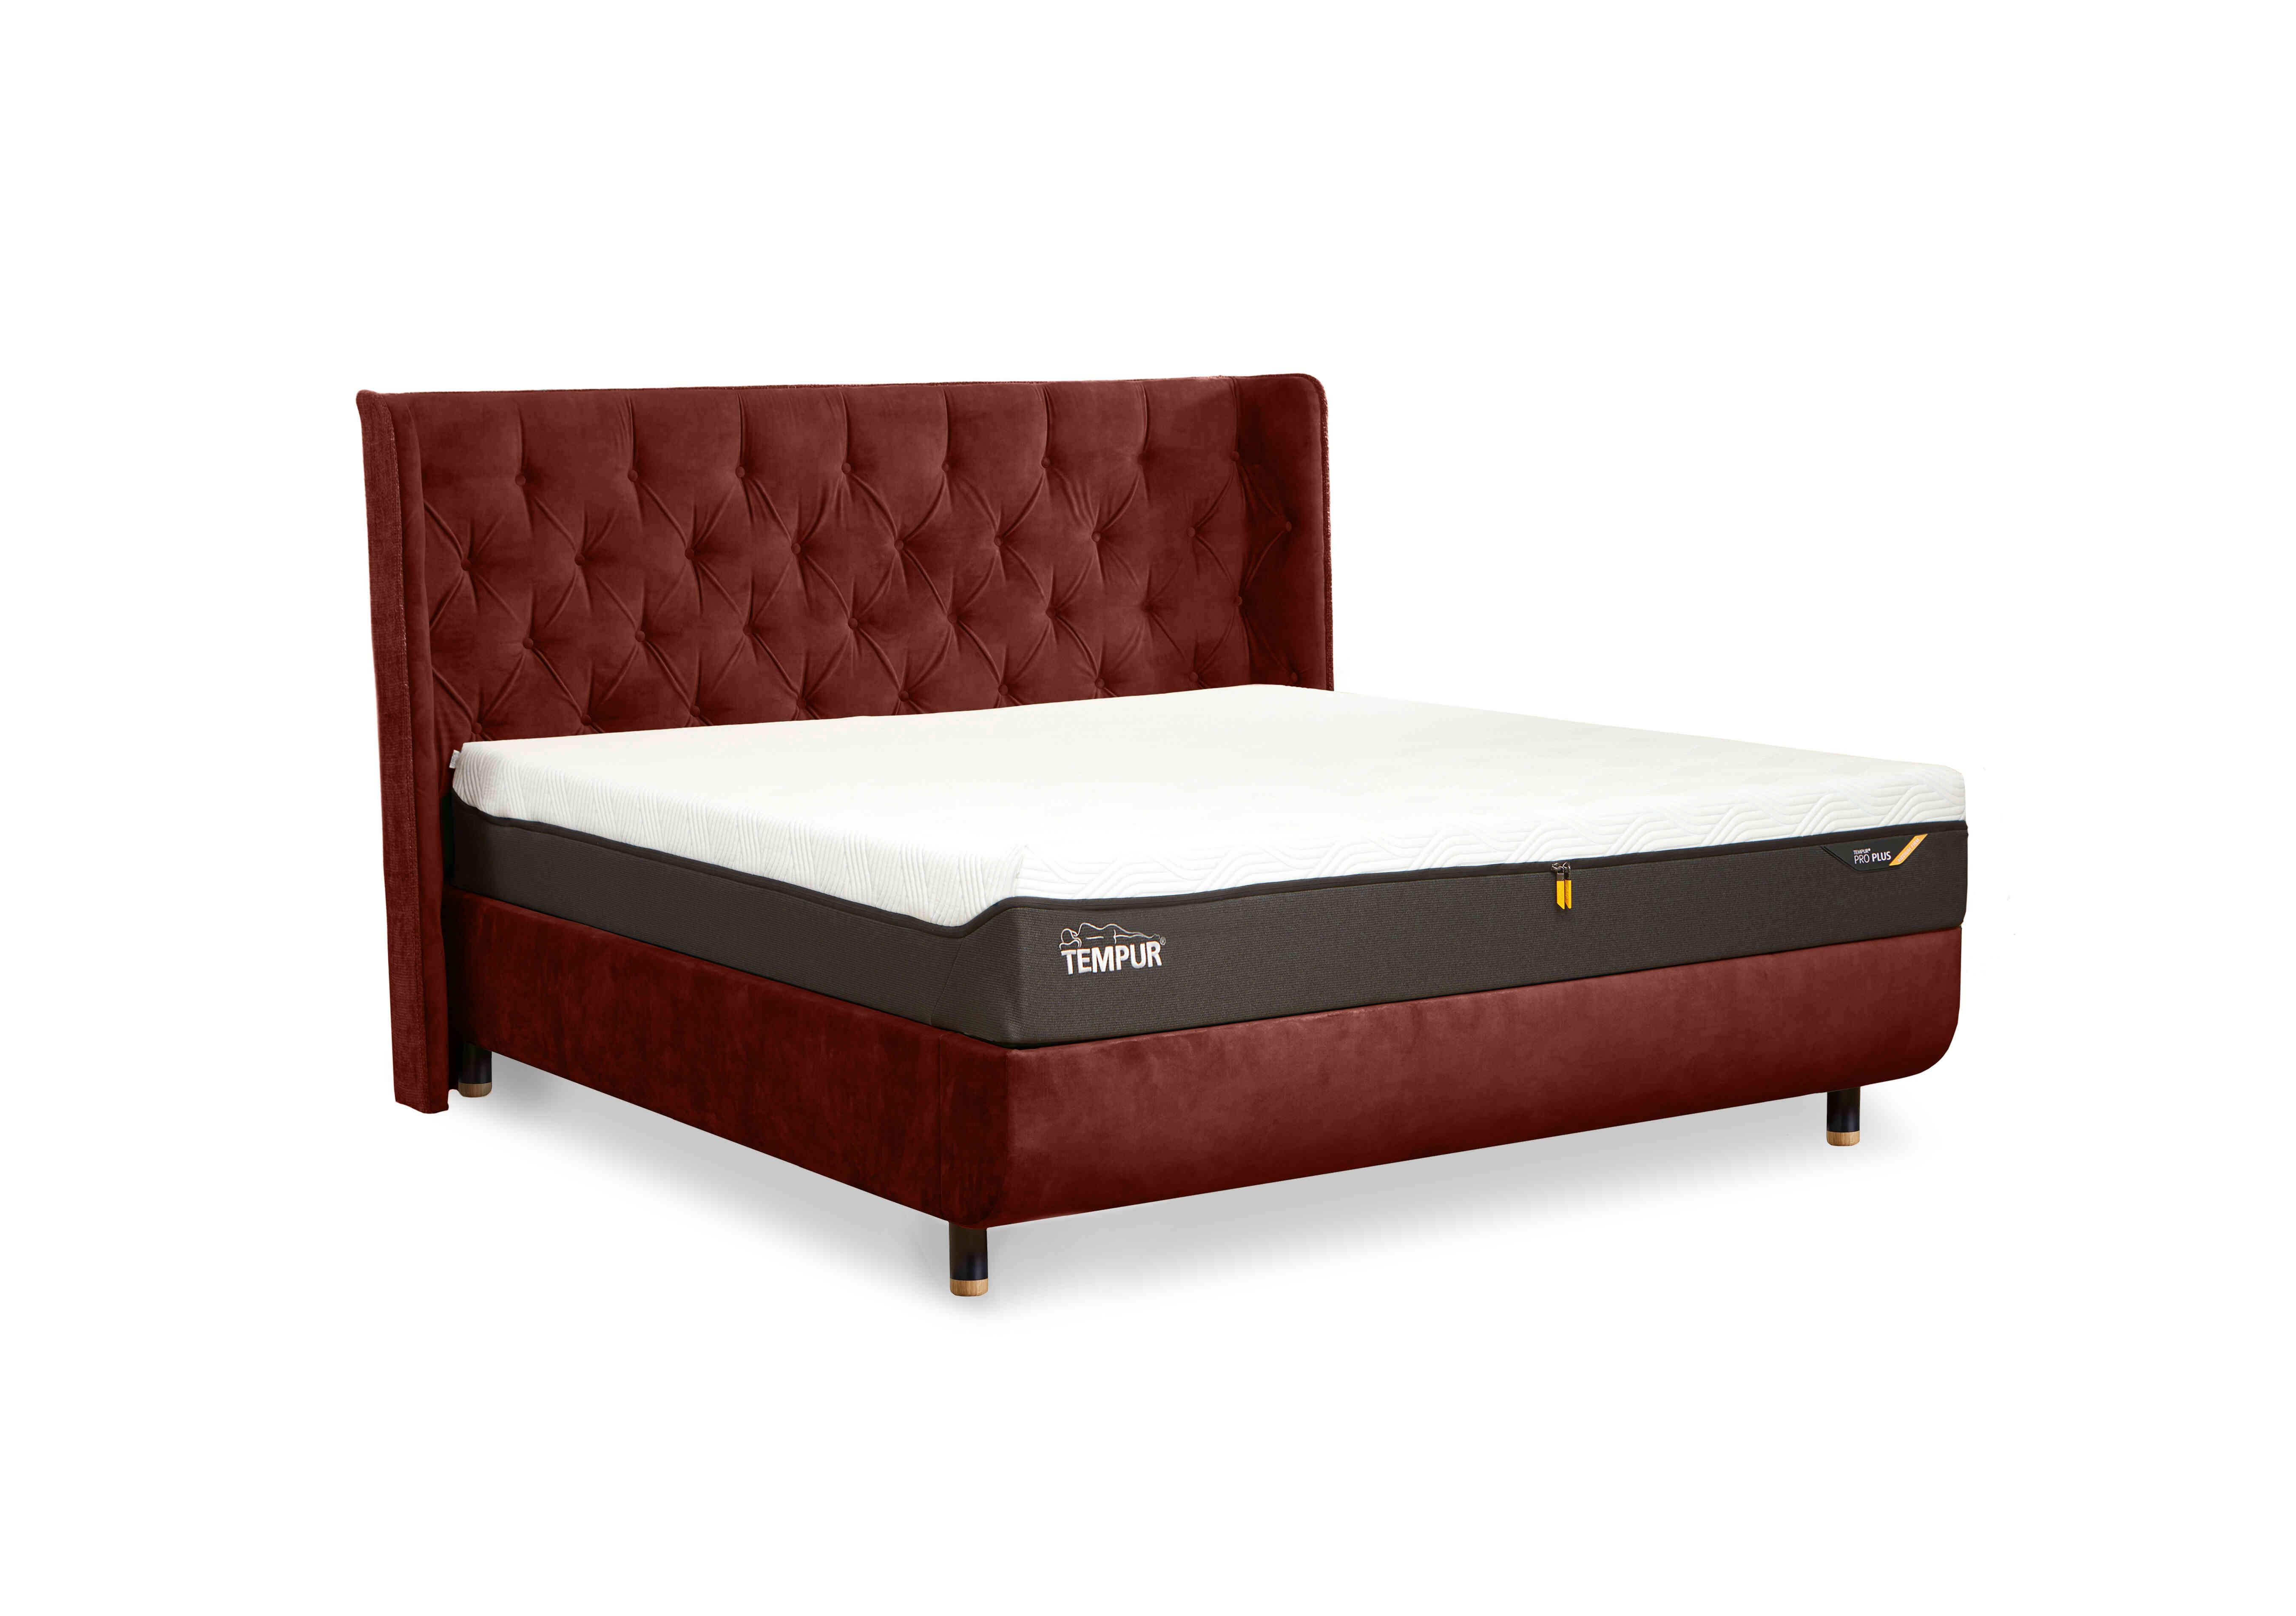 Arc Disc Bed Frame with Luxury Headboard in Copper/Copper Red-Nat Ash Ft on Furniture Village